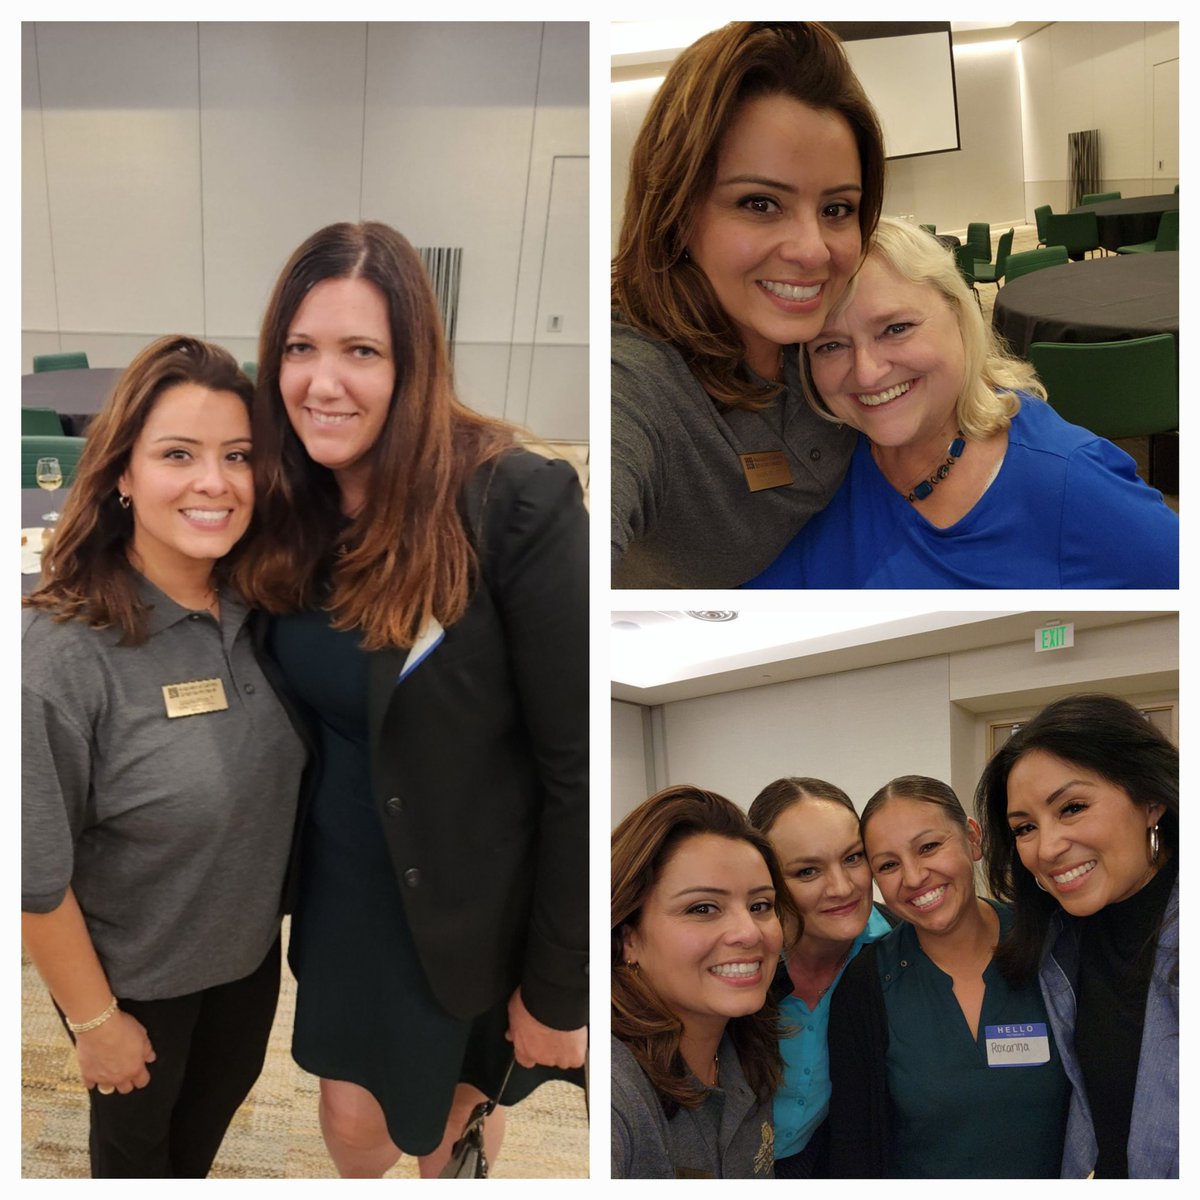 ACSA Fall Social, great time to catch up, network, and re-energize with amazing leaders. Thank you @ACSA_R16 @MsDamonte @ScottAtLAUSD @davalos_ileana @SerratoDr @ErwinElementary @MiddleReed @JonasLAUSD @SMMendoza123 @LASchools @michael_payne2